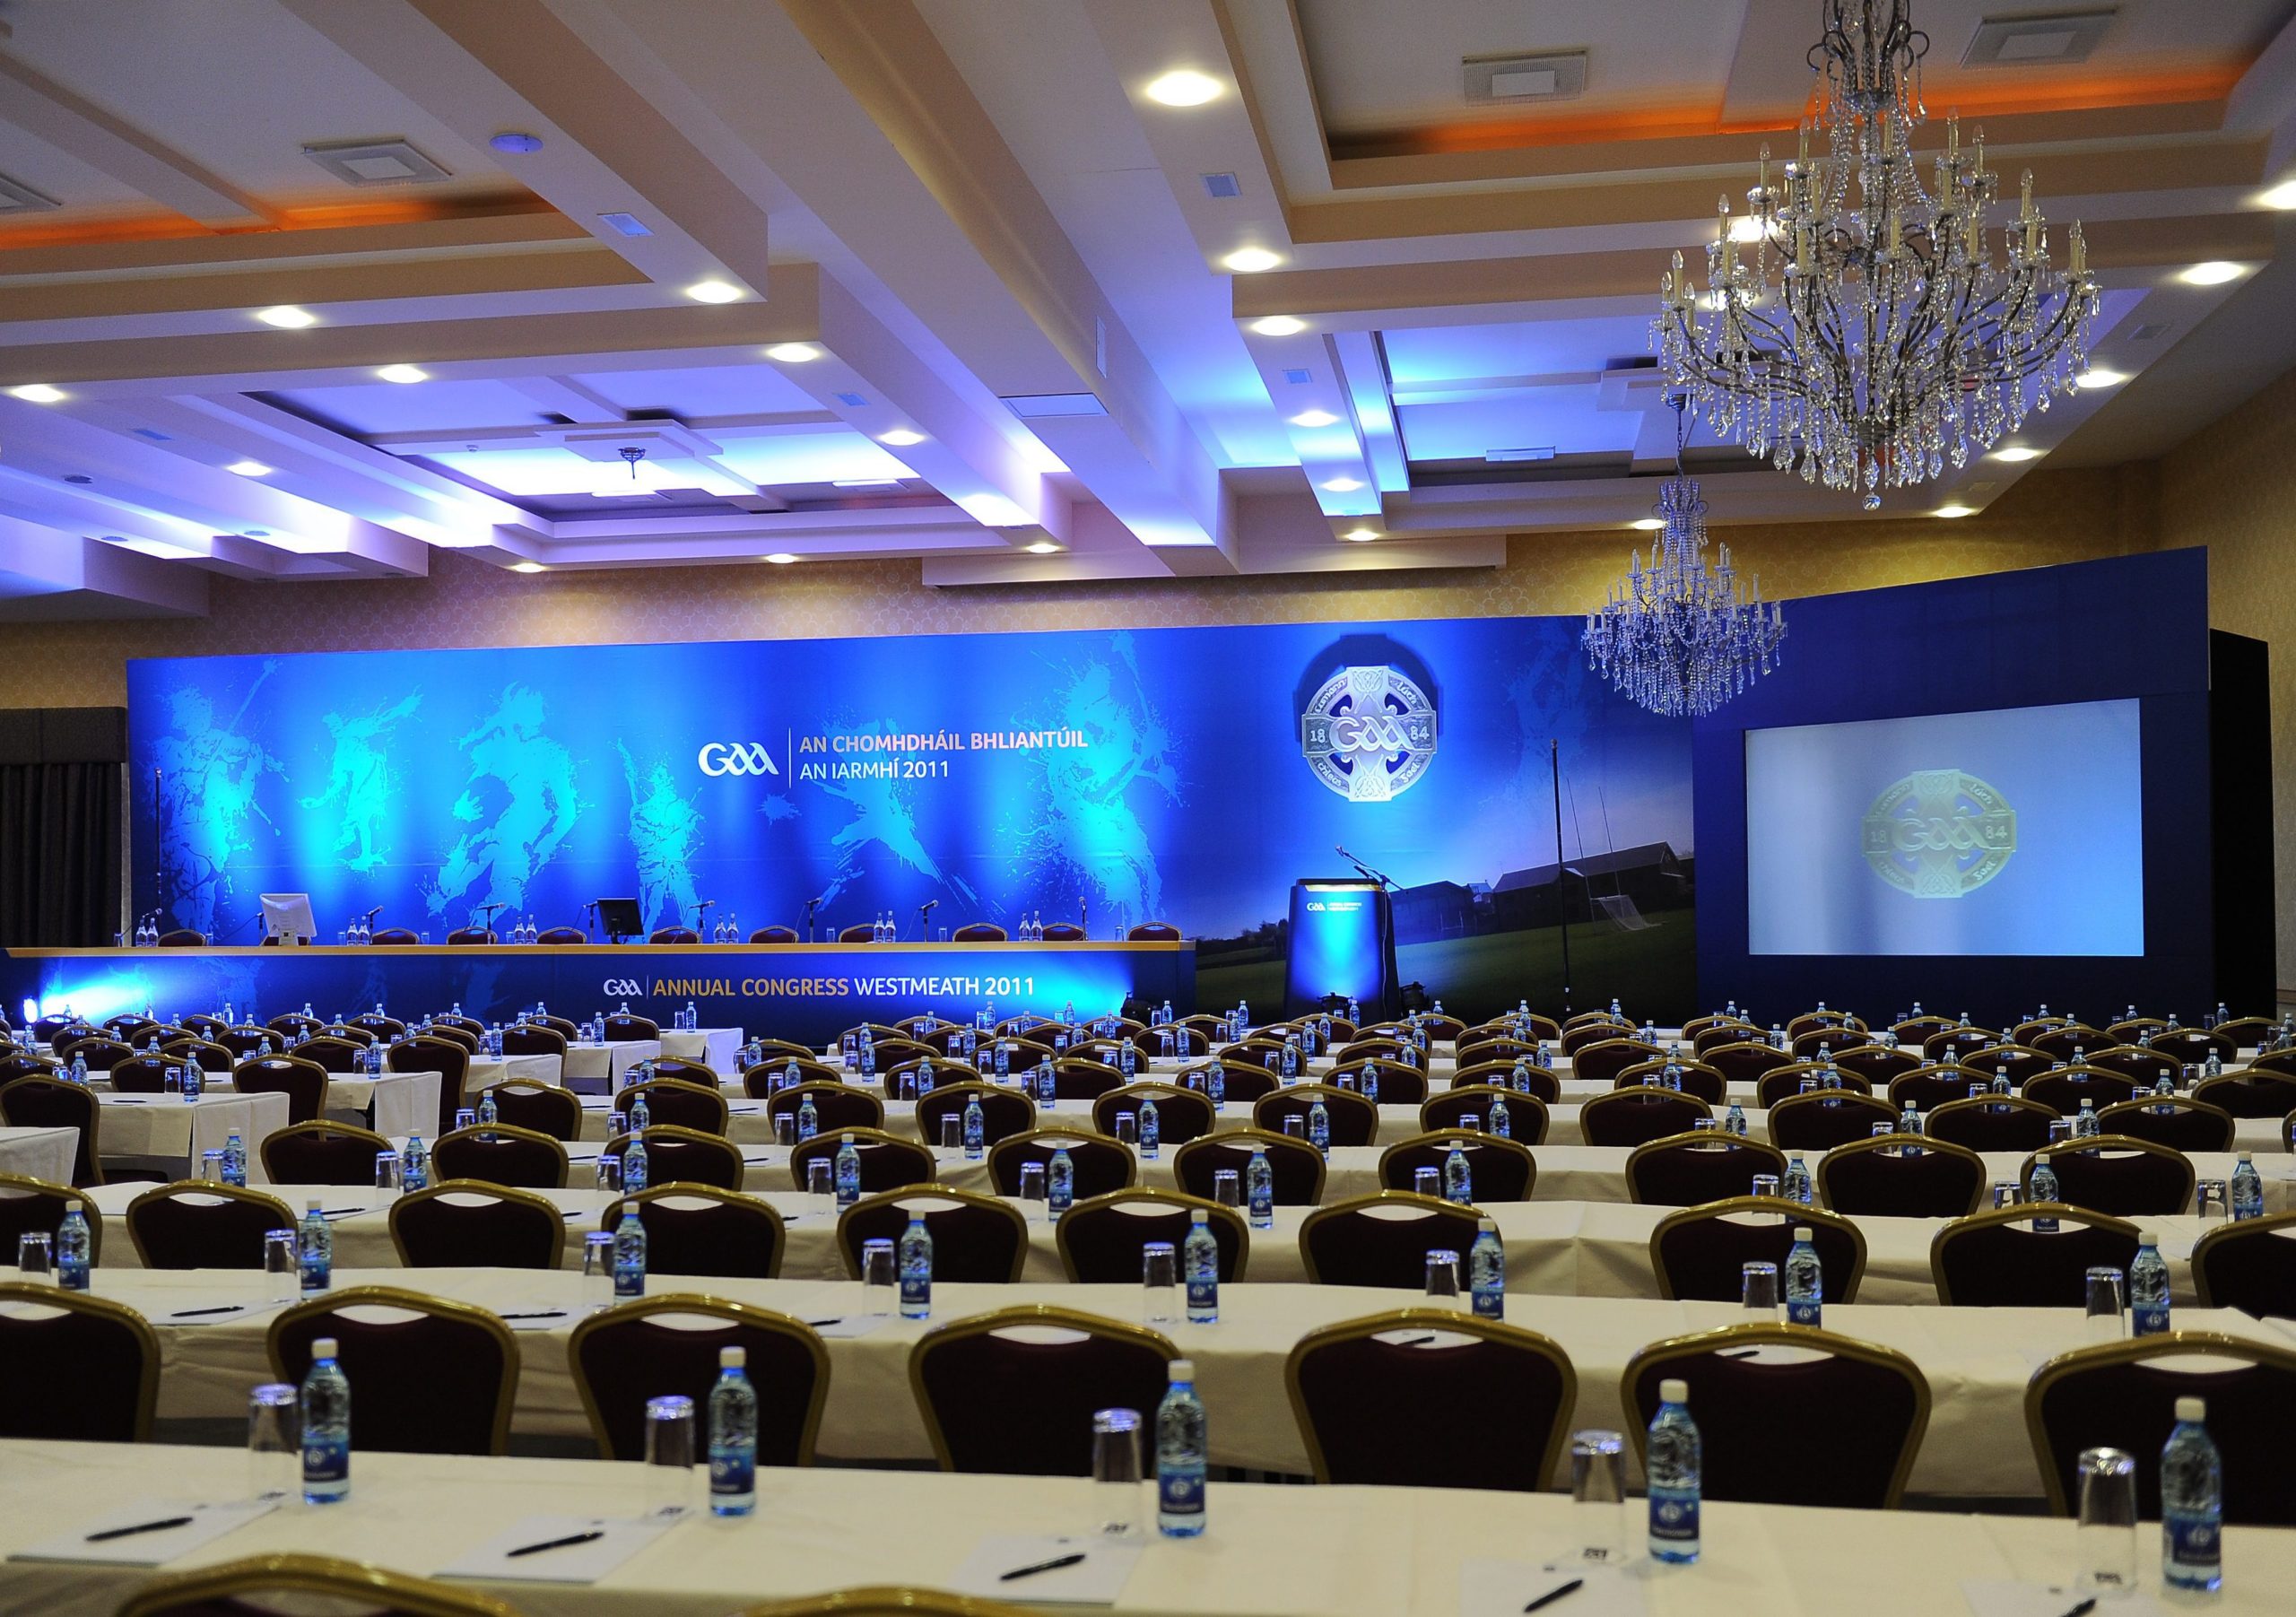 Cappagh Takes Centre Stage At GAA Congress